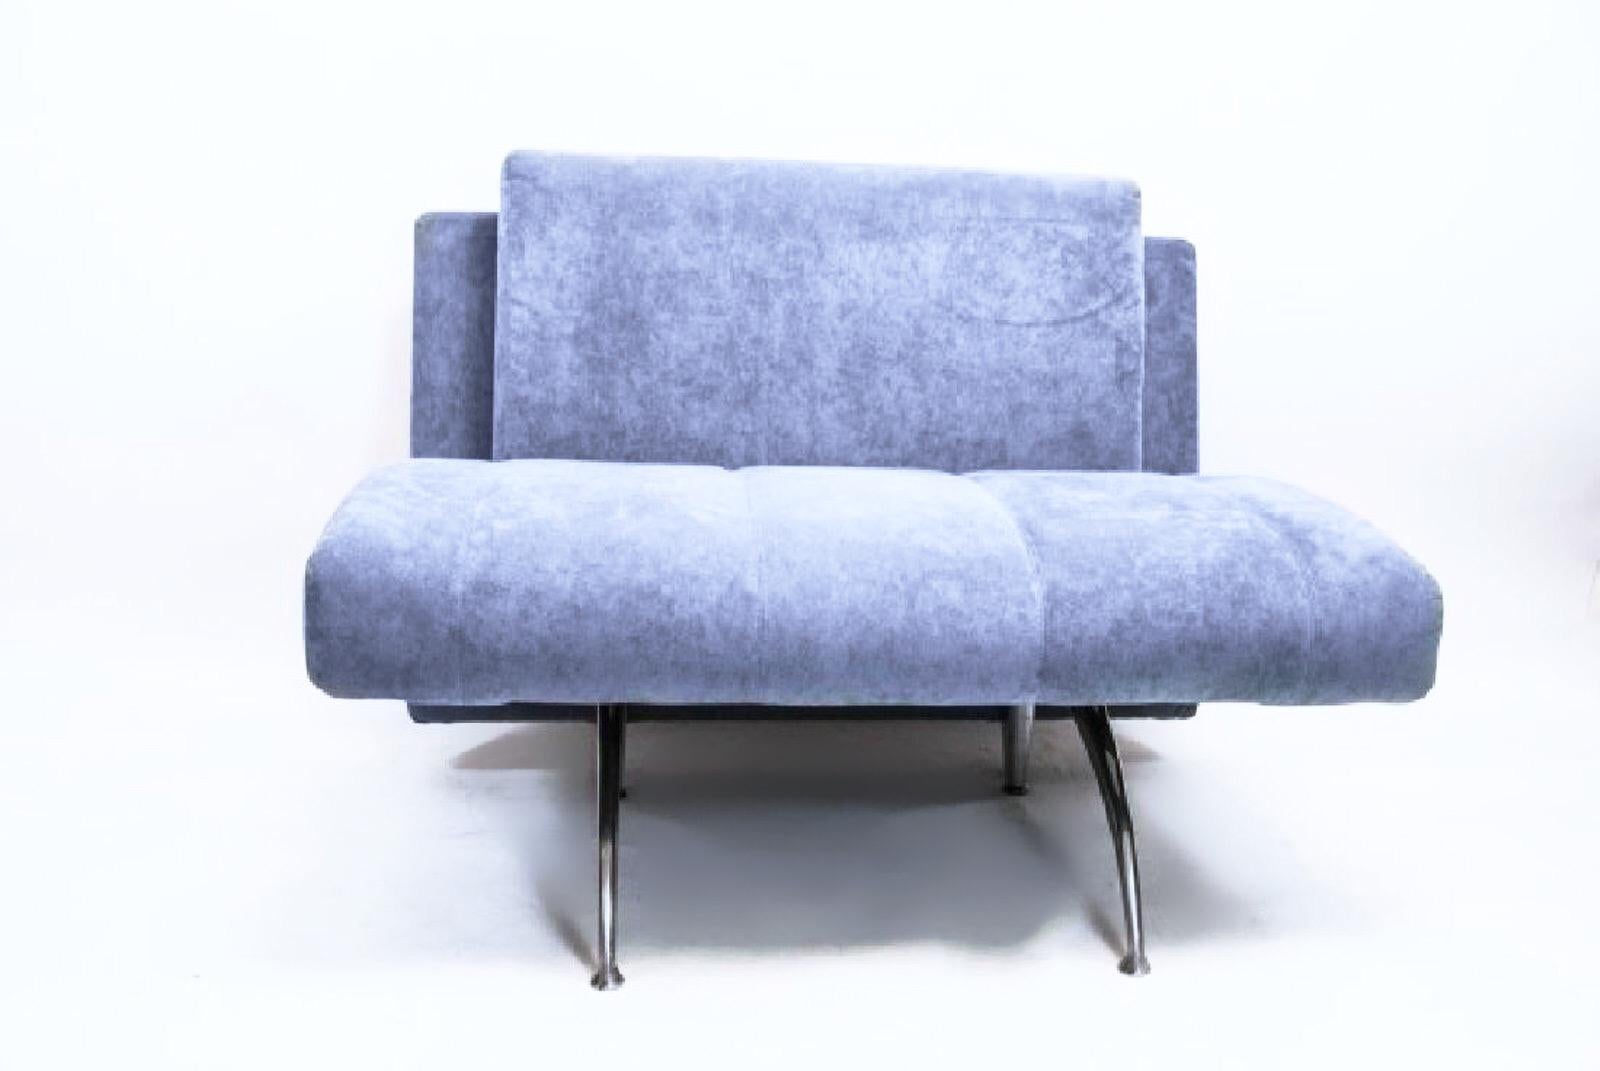 Element 1 from Rudolf Dordoni's ‘waiting’ collection 1989. This design by Rudolf Dordoni for Moroso Italia is covered in the original steel grey blue alcantra suede and has brushed aluminum feet. Functions as a roomy one-seat settee or cozy two-seat